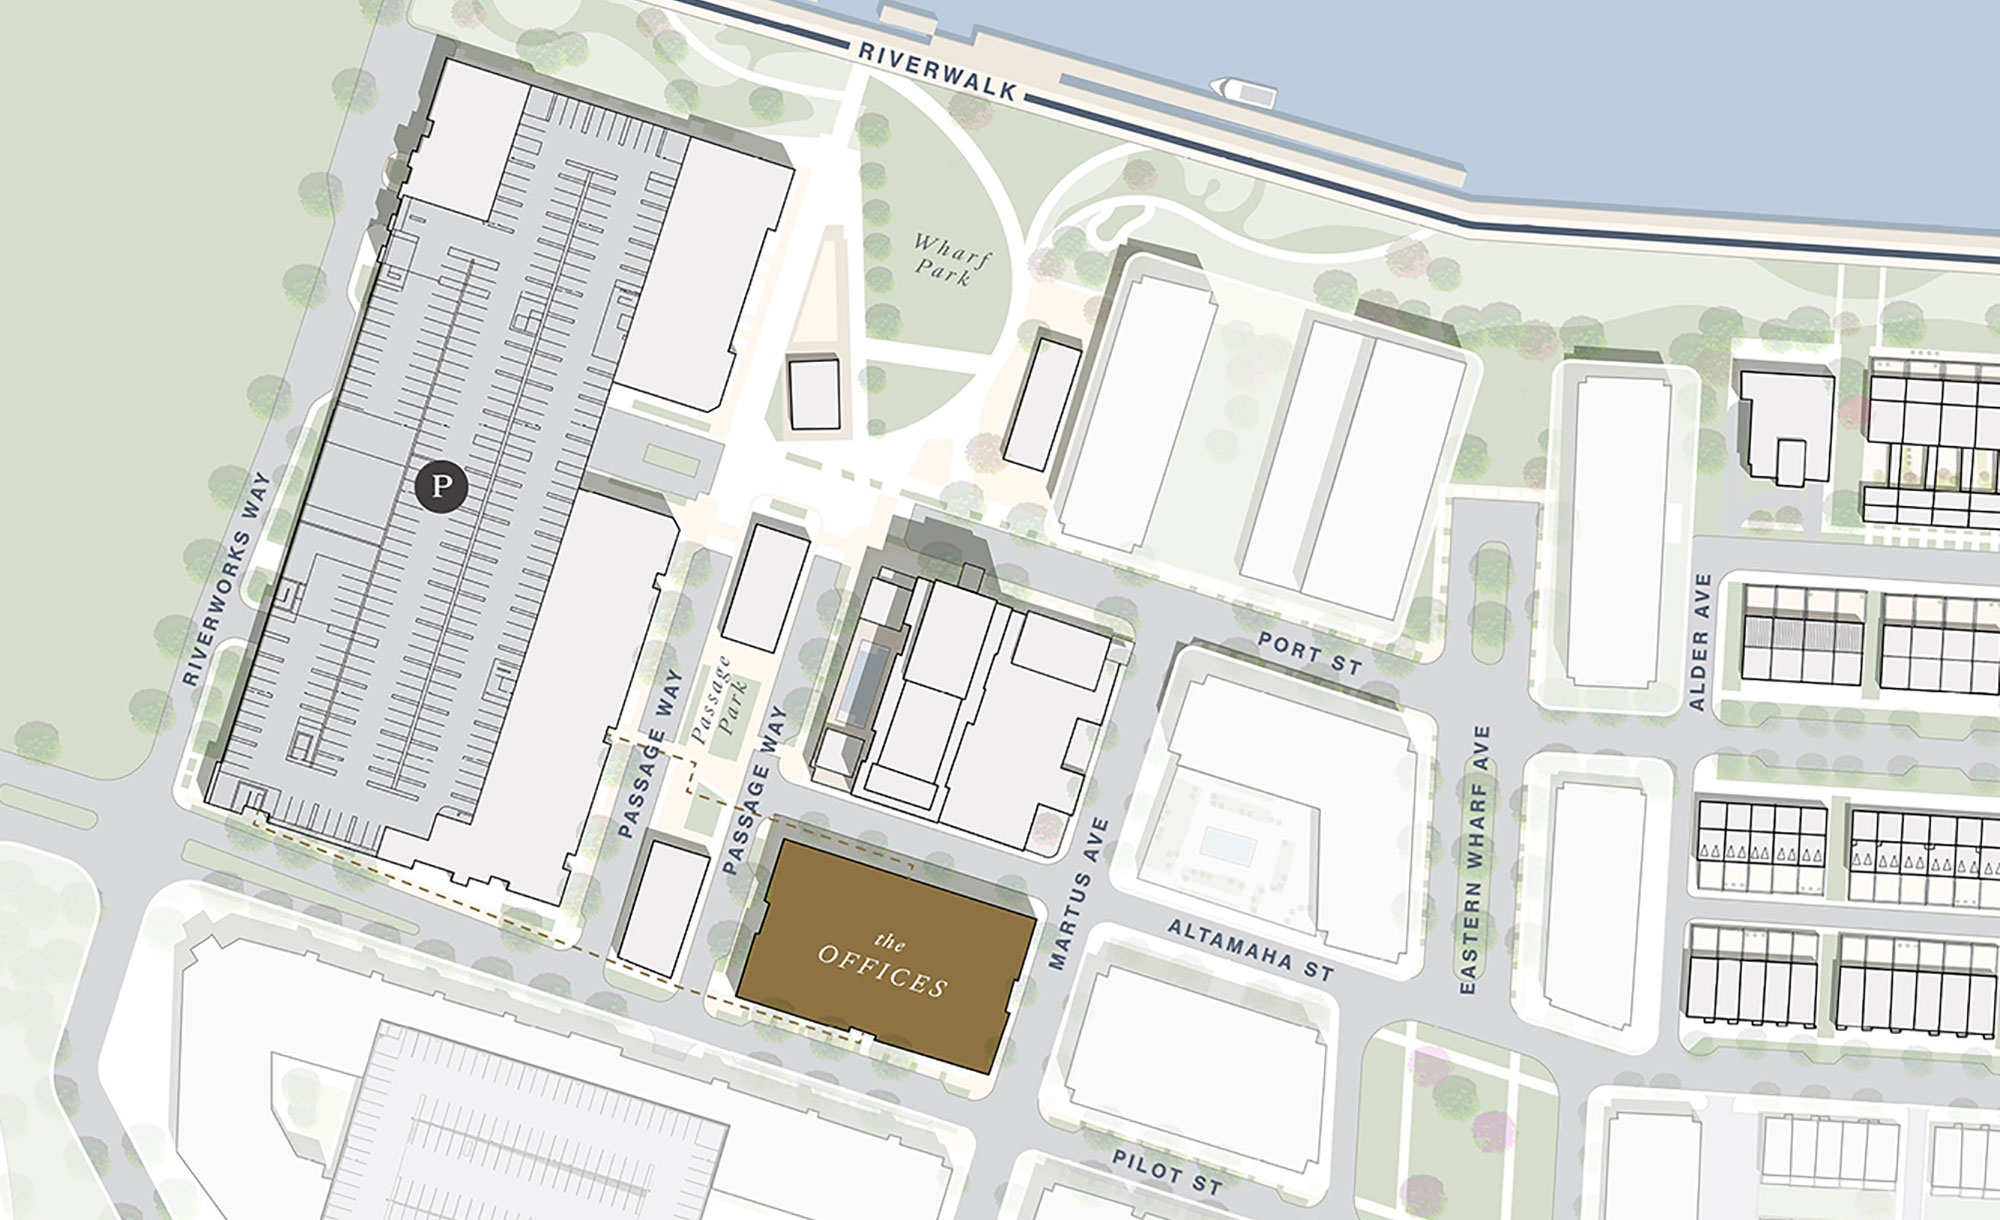 Offices at Eastern Wharf Site Plan